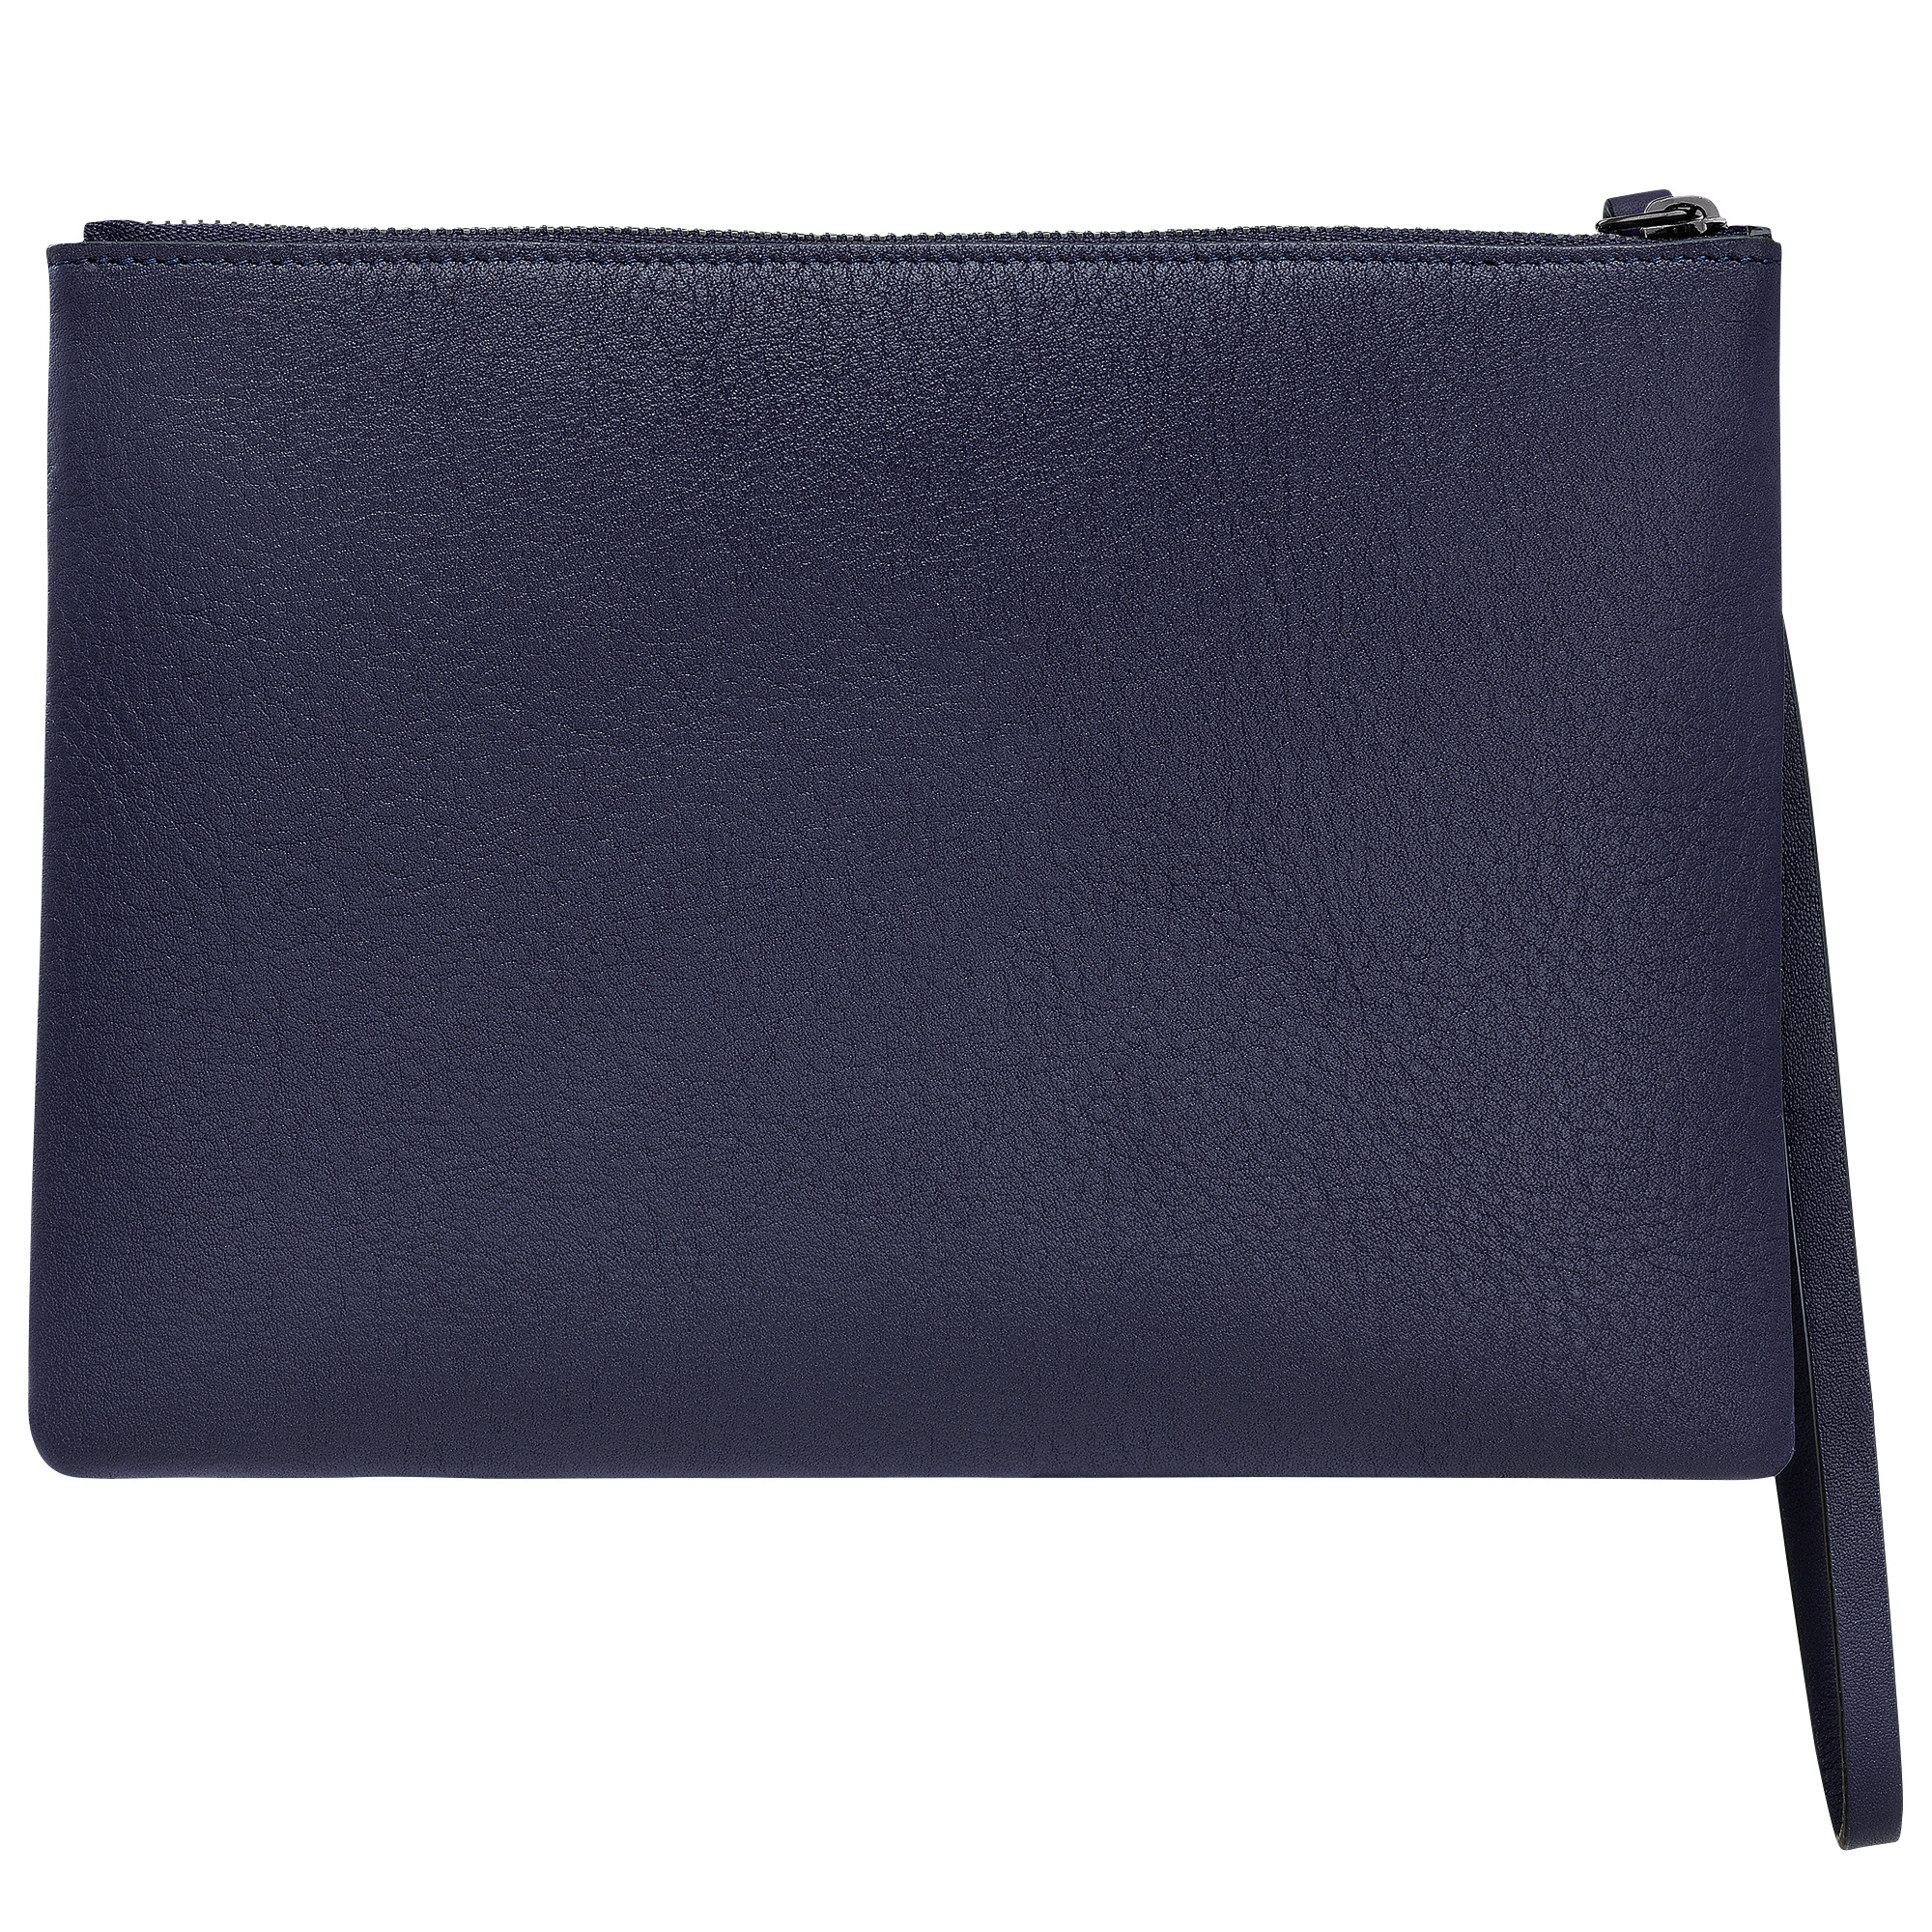 Longchamp 3D Pouch Bilberry - Leather - 3